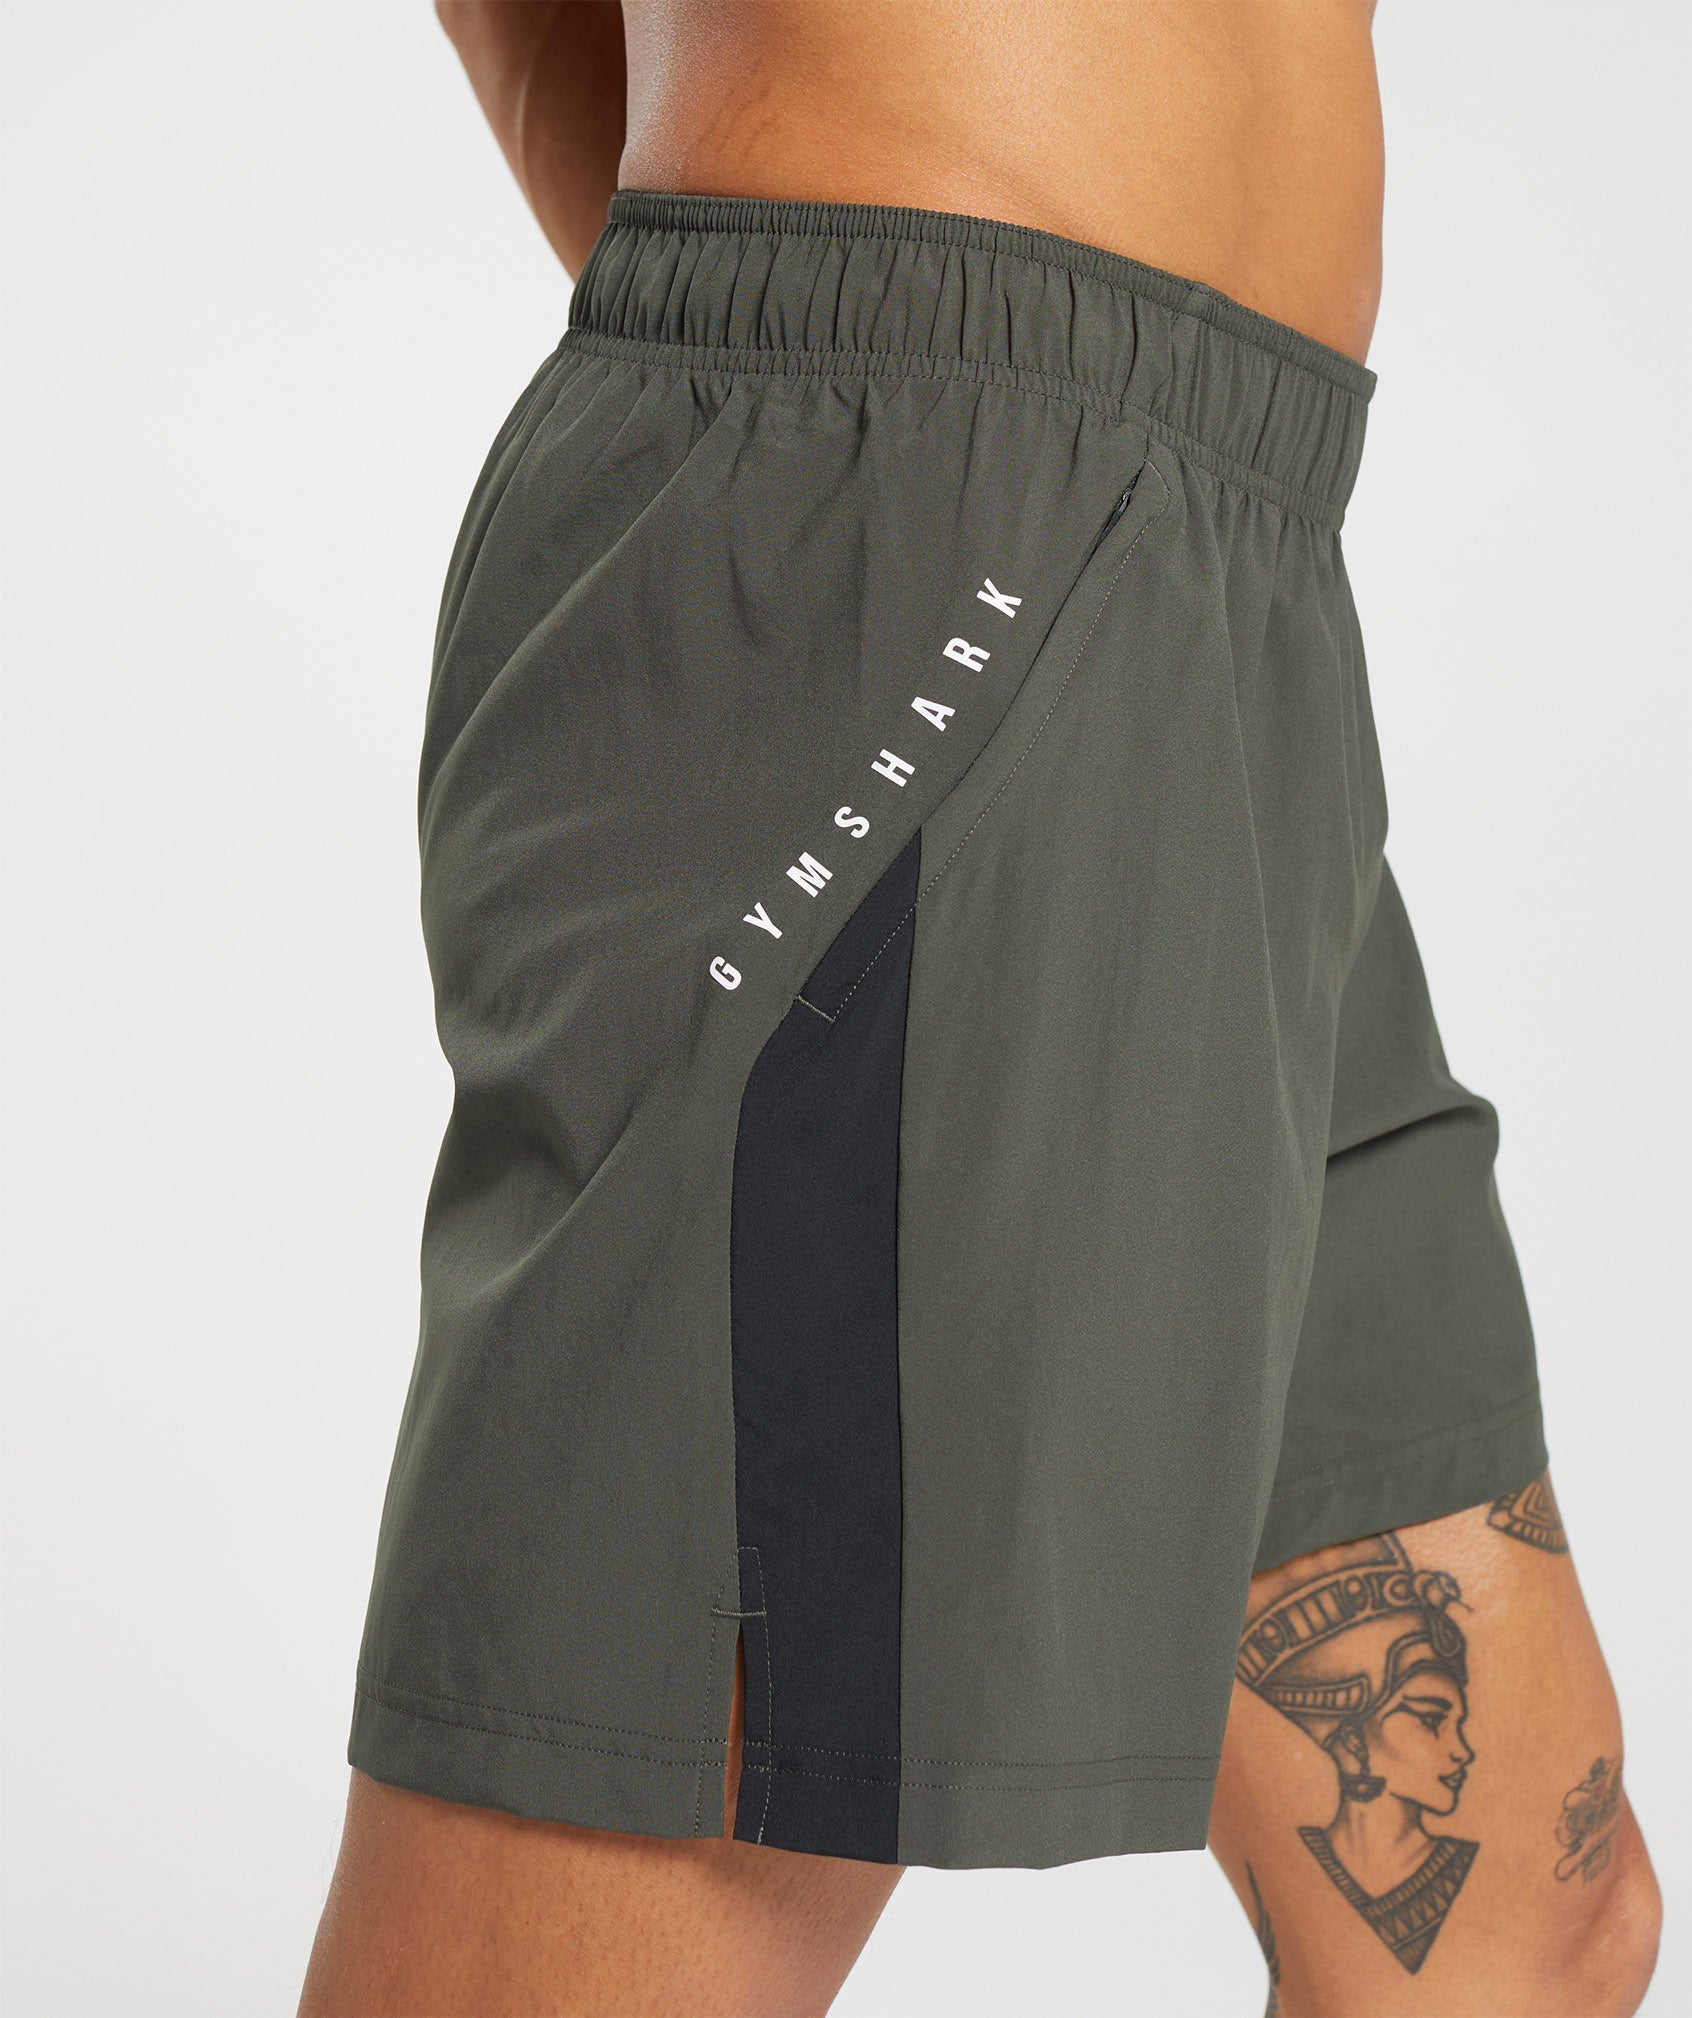 Sport 7" Shorts in Strength Green/Black - view 7